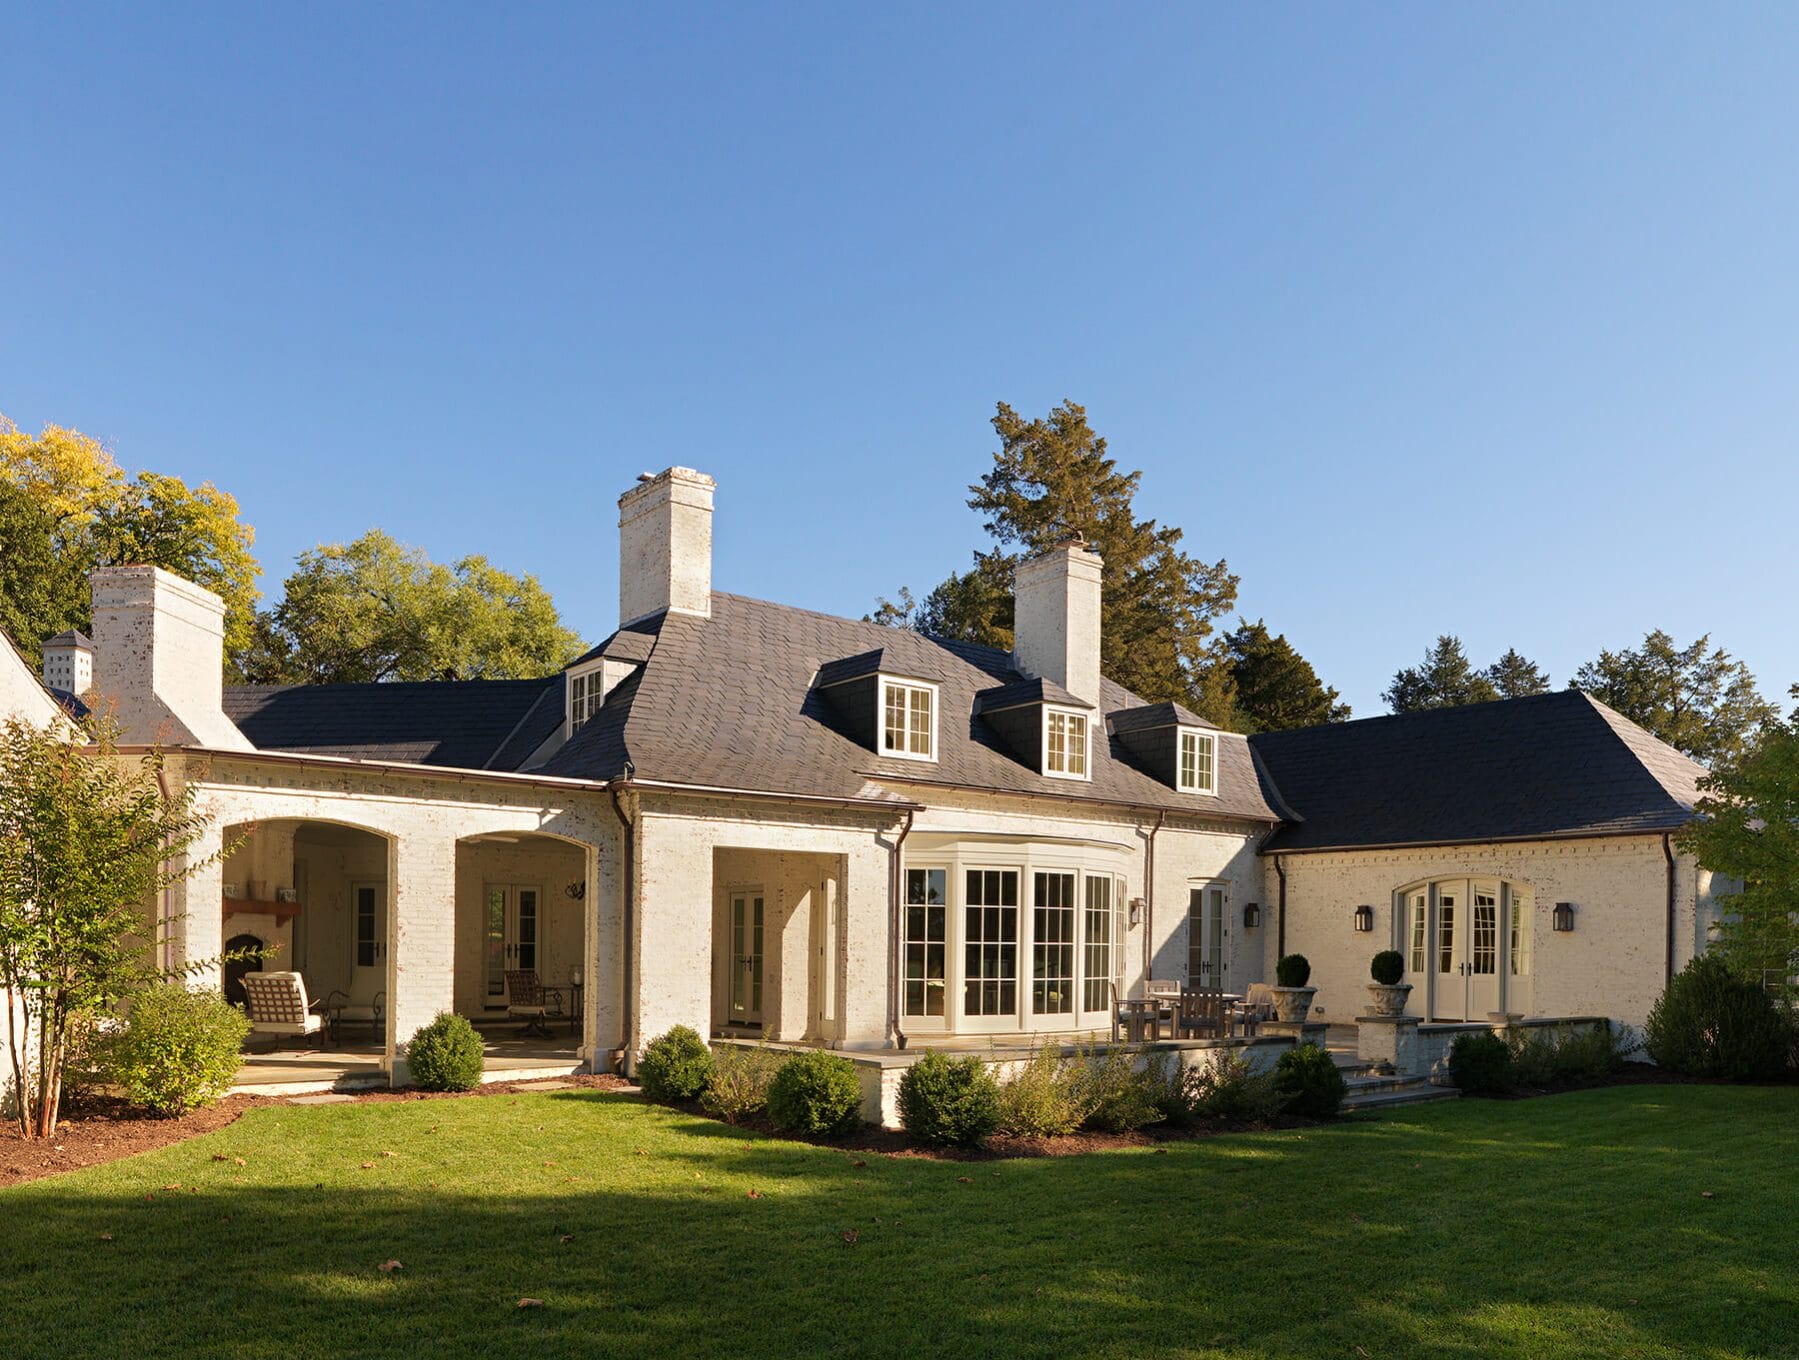 GME builders specializes in preserving and reconstructing Virginia's historic architecture and estates.